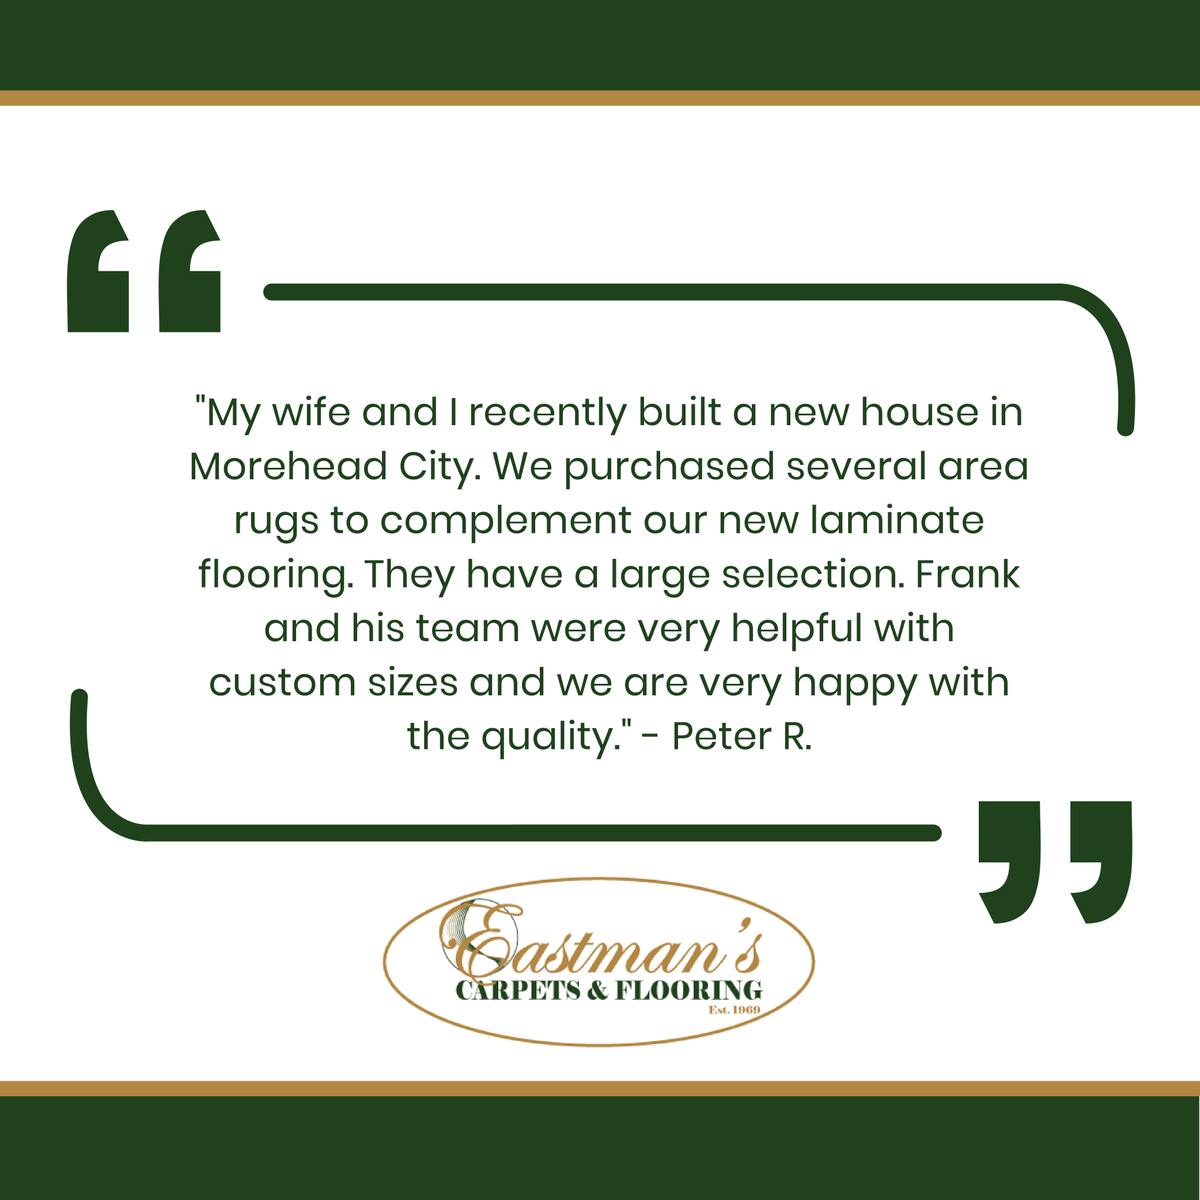 We're proud to supply one of the largest area rug selections on the #CrystalCoast! Thank you for this wonderful review, Peter! #eastmancarpetsandflooring